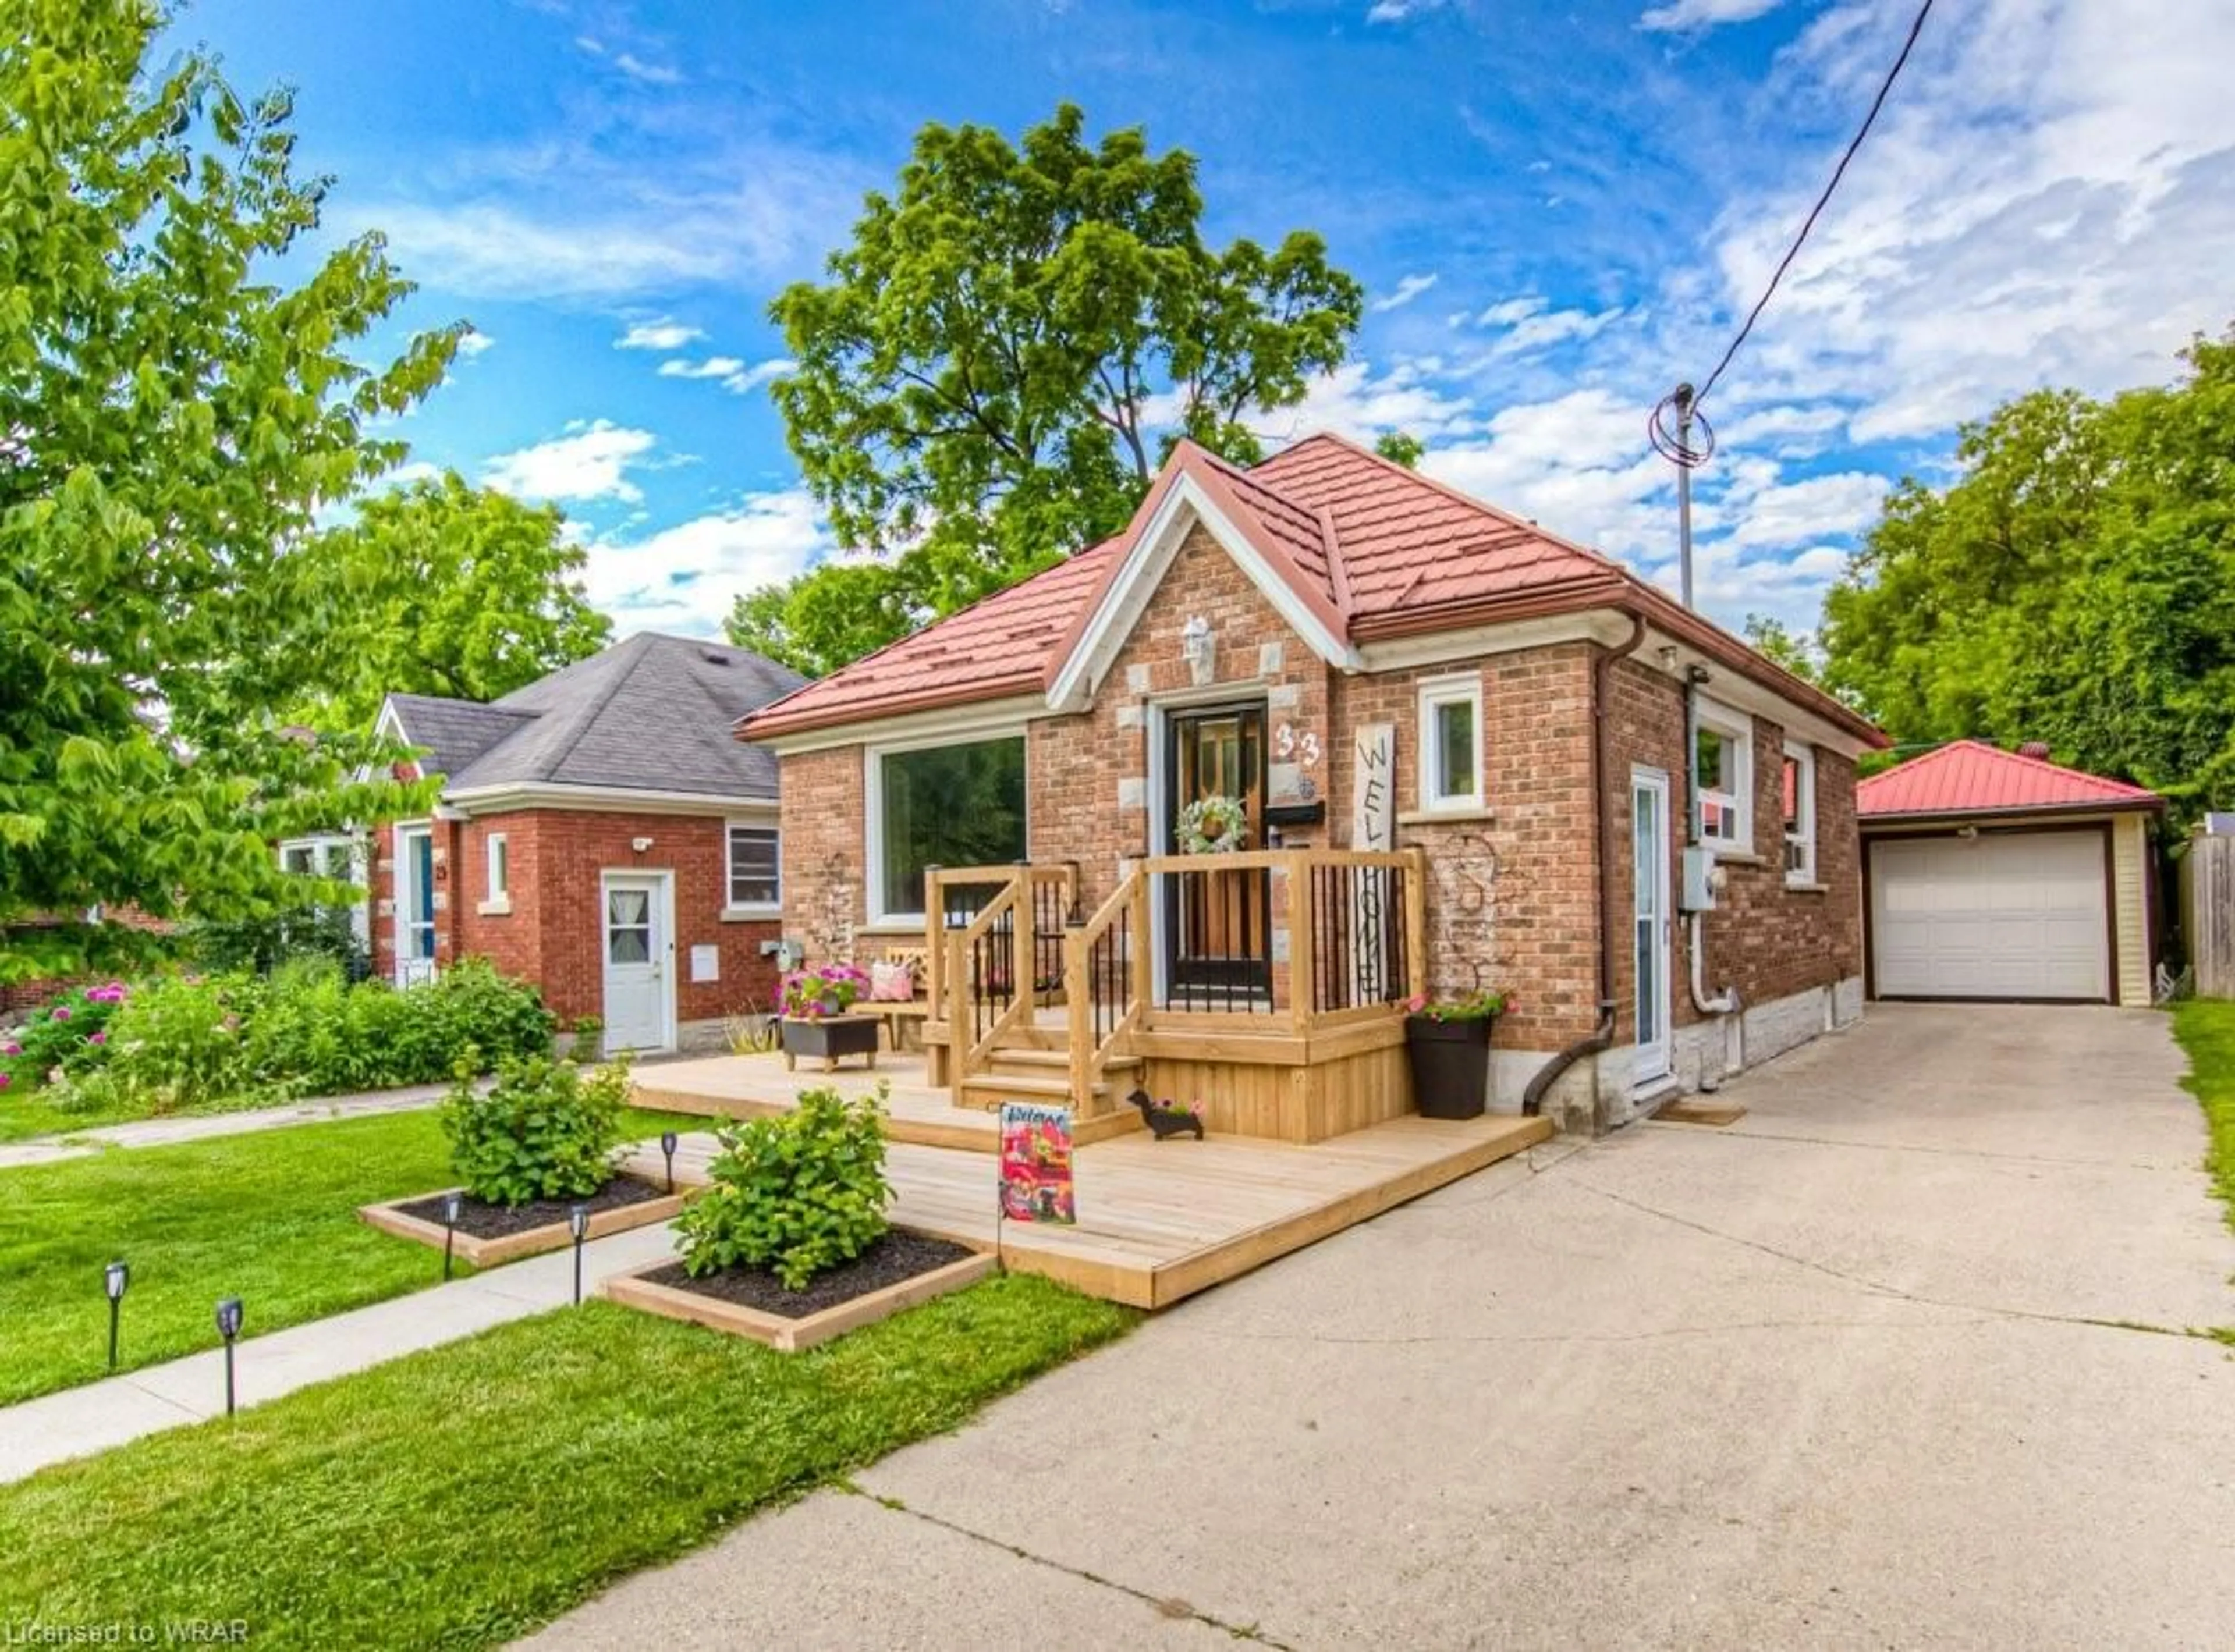 Home with brick exterior material for 33 Hett Ave, Kitchener Ontario N2H 4G2